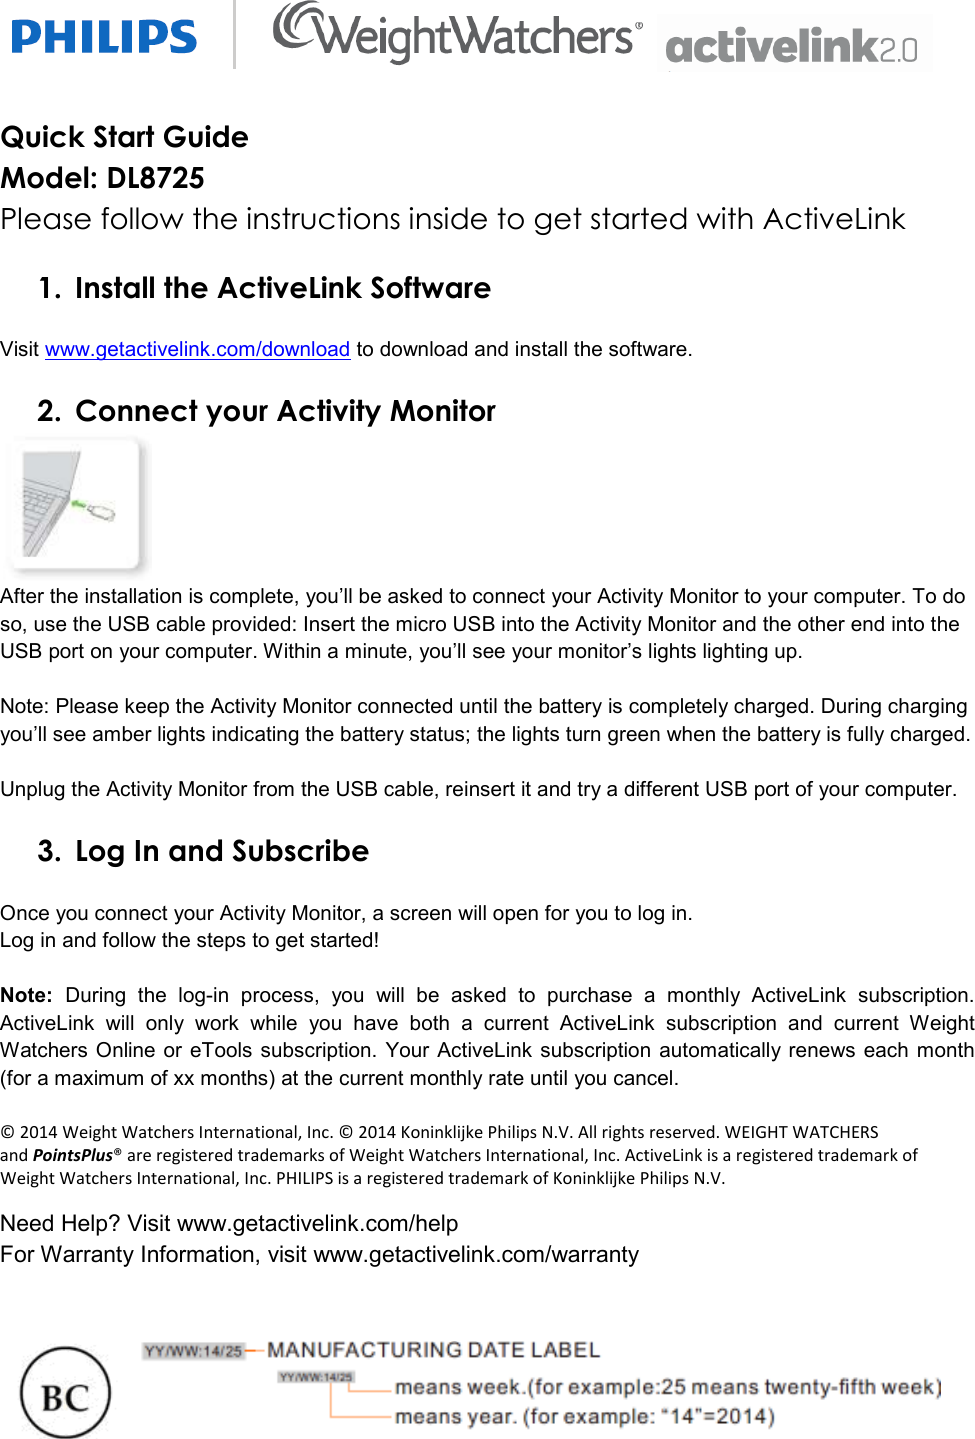   Quick Start Guide   Model: DL8725 Please follow the instructions inside to get started with ActiveLink  1. Install the ActiveLink Software  Visit www.getactivelink.com/download to download and install the software.  2. Connect your Activity Monitor  After the installation is complete, you’ll be asked to connect your Activity Monitor to your computer. To do so, use the USB cable provided: Insert the micro USB into the Activity Monitor and the other end into the USB port on your computer. Within a minute, you’ll see your monitor’s lights lighting up.   Note: Please keep the Activity Monitor connected until the battery is completely charged. During charging you’ll see amber lights indicating the battery status; the lights turn green when the battery is fully charged.  Unplug the Activity Monitor from the USB cable, reinsert it and try a different USB port of your computer.   3. Log In and Subscribe  Once you connect your Activity Monitor, a screen will open for you to log in.  Log in and follow the steps to get started!  Note:  During  the  log-in  process,  you  will  be  asked  to  purchase  a  monthly  ActiveLink  subscription. ActiveLink  will  only  work  while  you  have  both  a  current  ActiveLink  subscription  and  current  Weight Watchers Online or eTools subscription.  Your ActiveLink subscription automatically renews each month (for a maximum of xx months) at the current monthly rate until you cancel.   © 2014 Weight Watchers International, Inc. © 2014 Koninklijke Philips N.V. All rights reserved. WEIGHT WATCHERS and PointsPlus® are registered trademarks of Weight Watchers International, Inc. ActiveLink is a registered trademark of Weight Watchers International, Inc. PHILIPS is a registered trademark of Koninklijke Philips N.V. Need Help? Visit www.getactivelink.com/help  For Warranty Information, visit www.getactivelink.com/warranty      